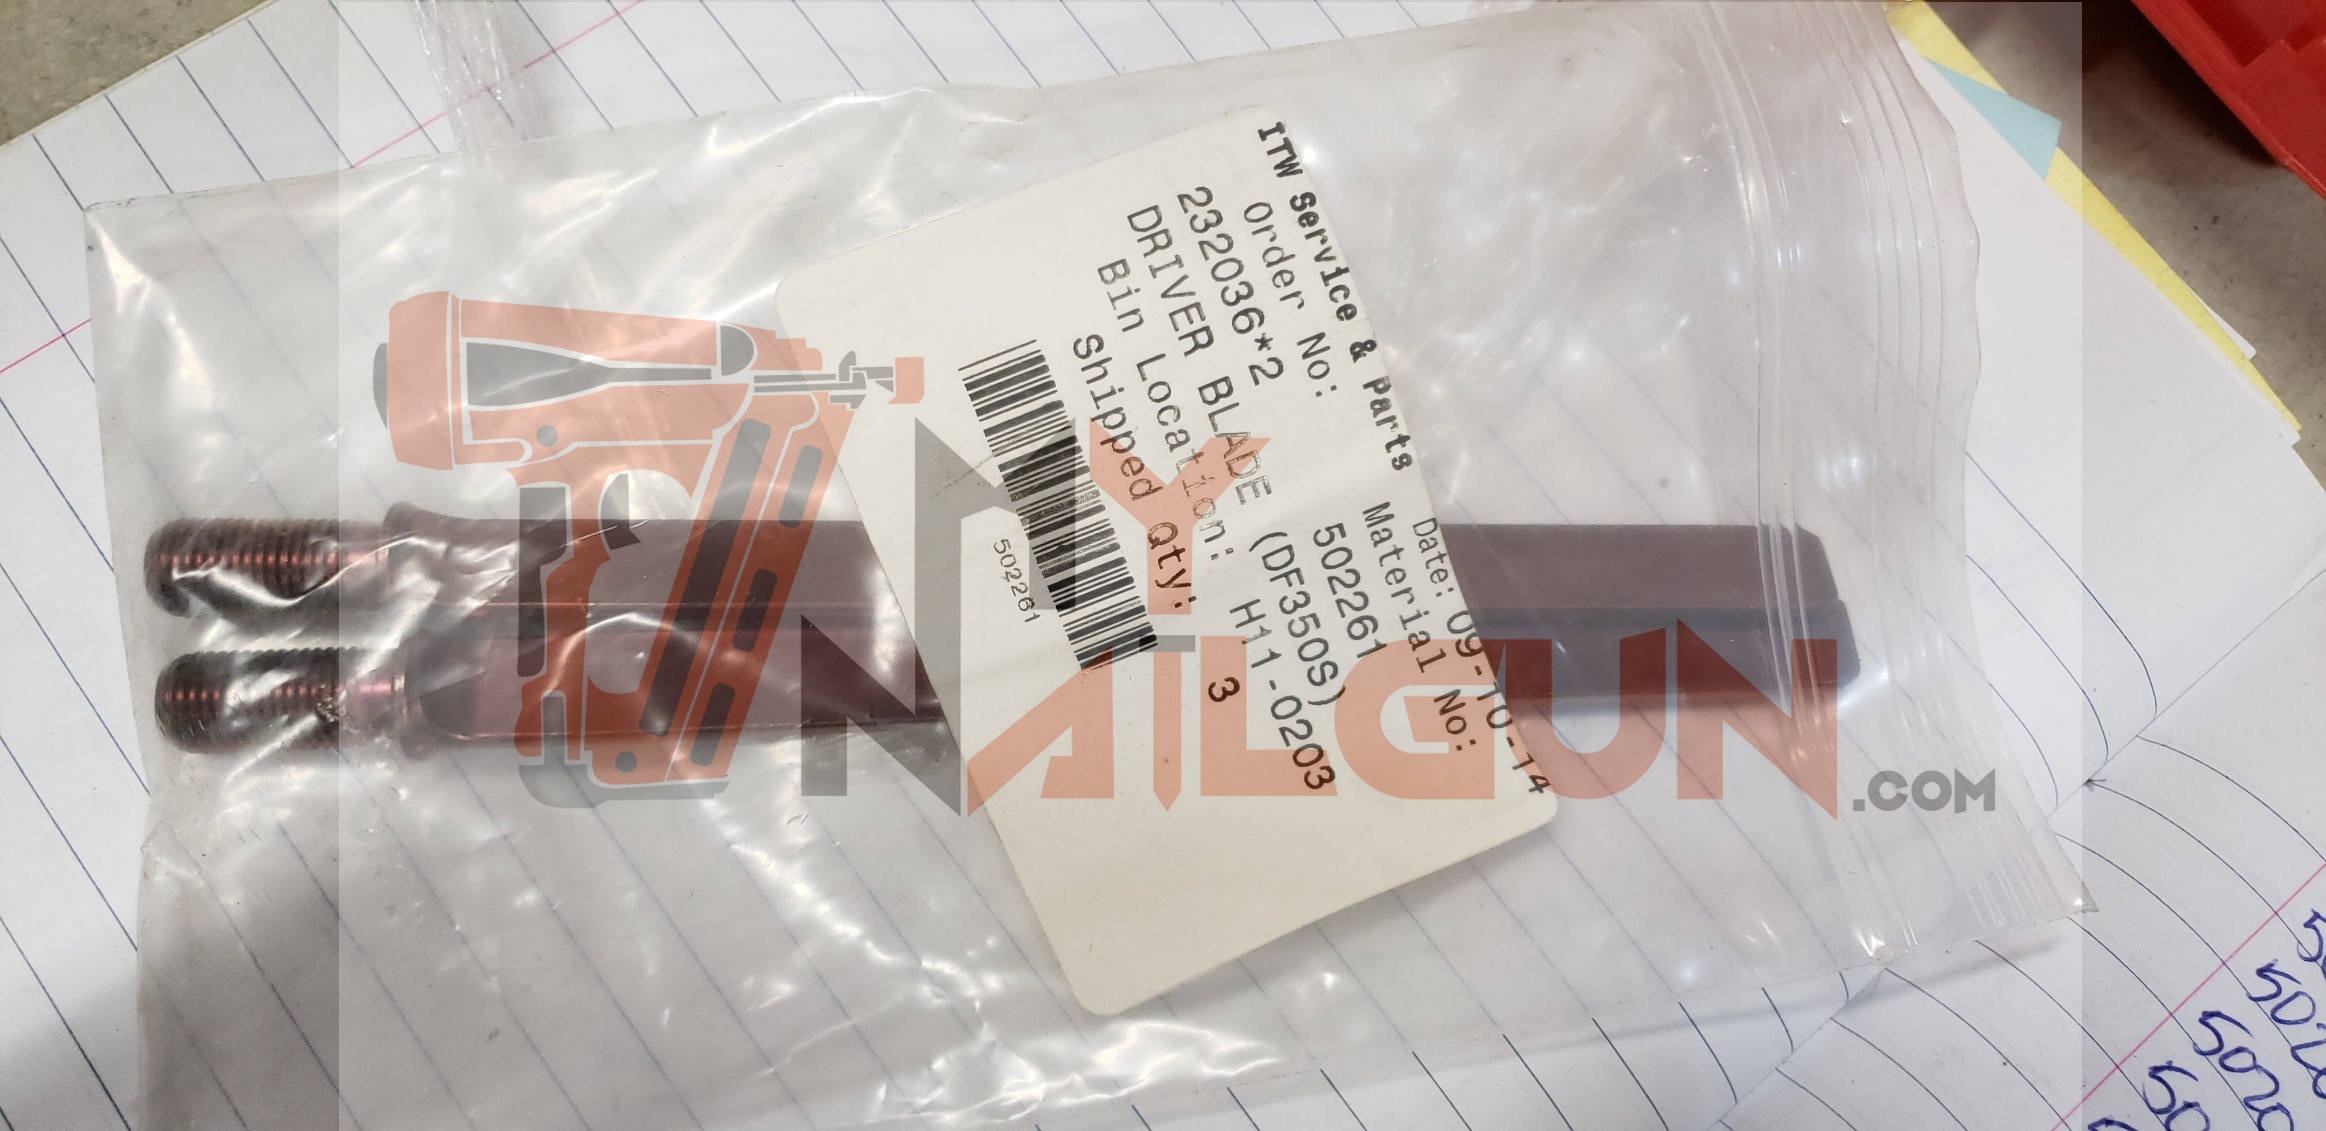 PACK OF 20 BUMPER FOR MAX CN55 Coil Nailer Part no CN31890 